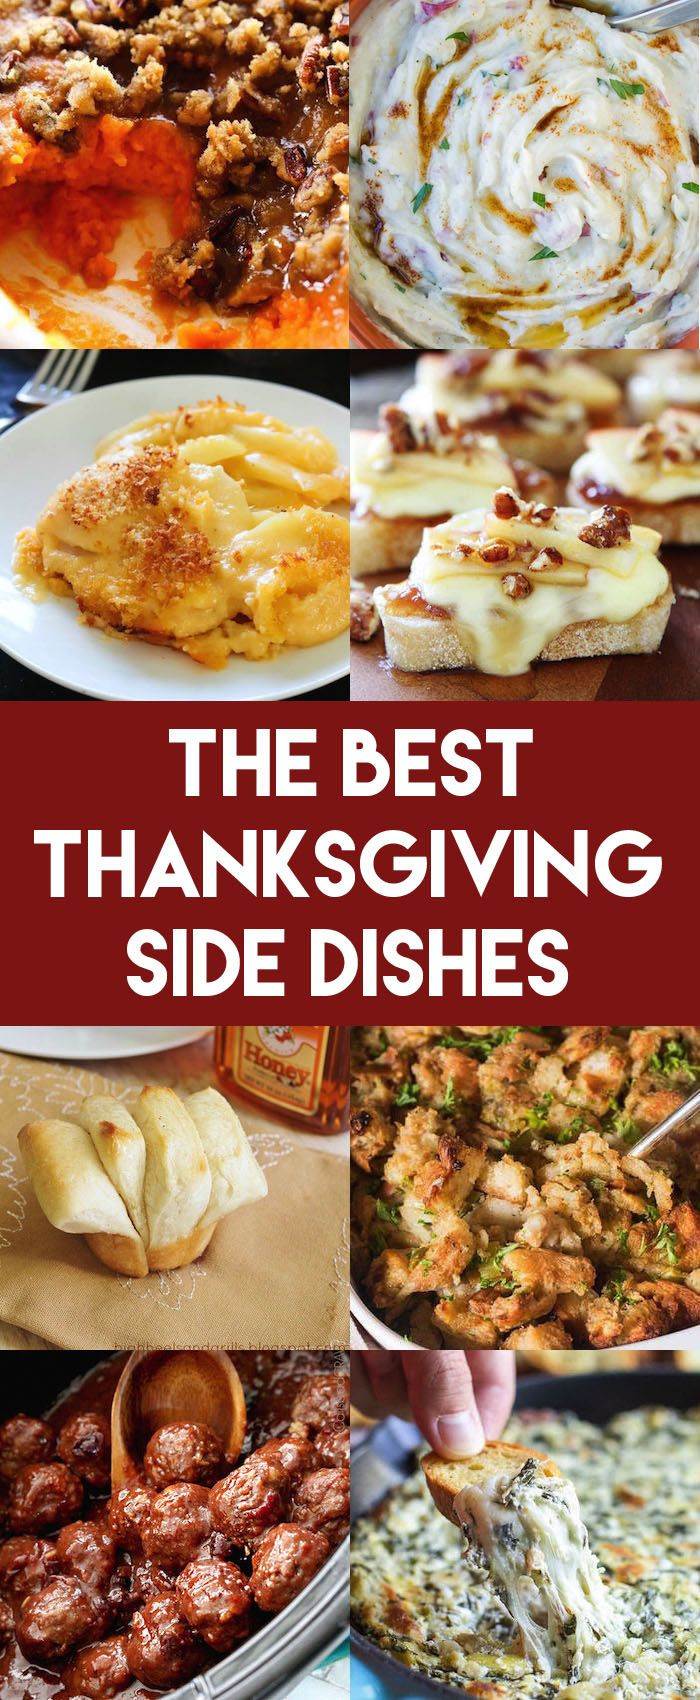 Best Thanksgiving Side Dishes
 Best 25 Thanksgiving recipes ideas on Pinterest